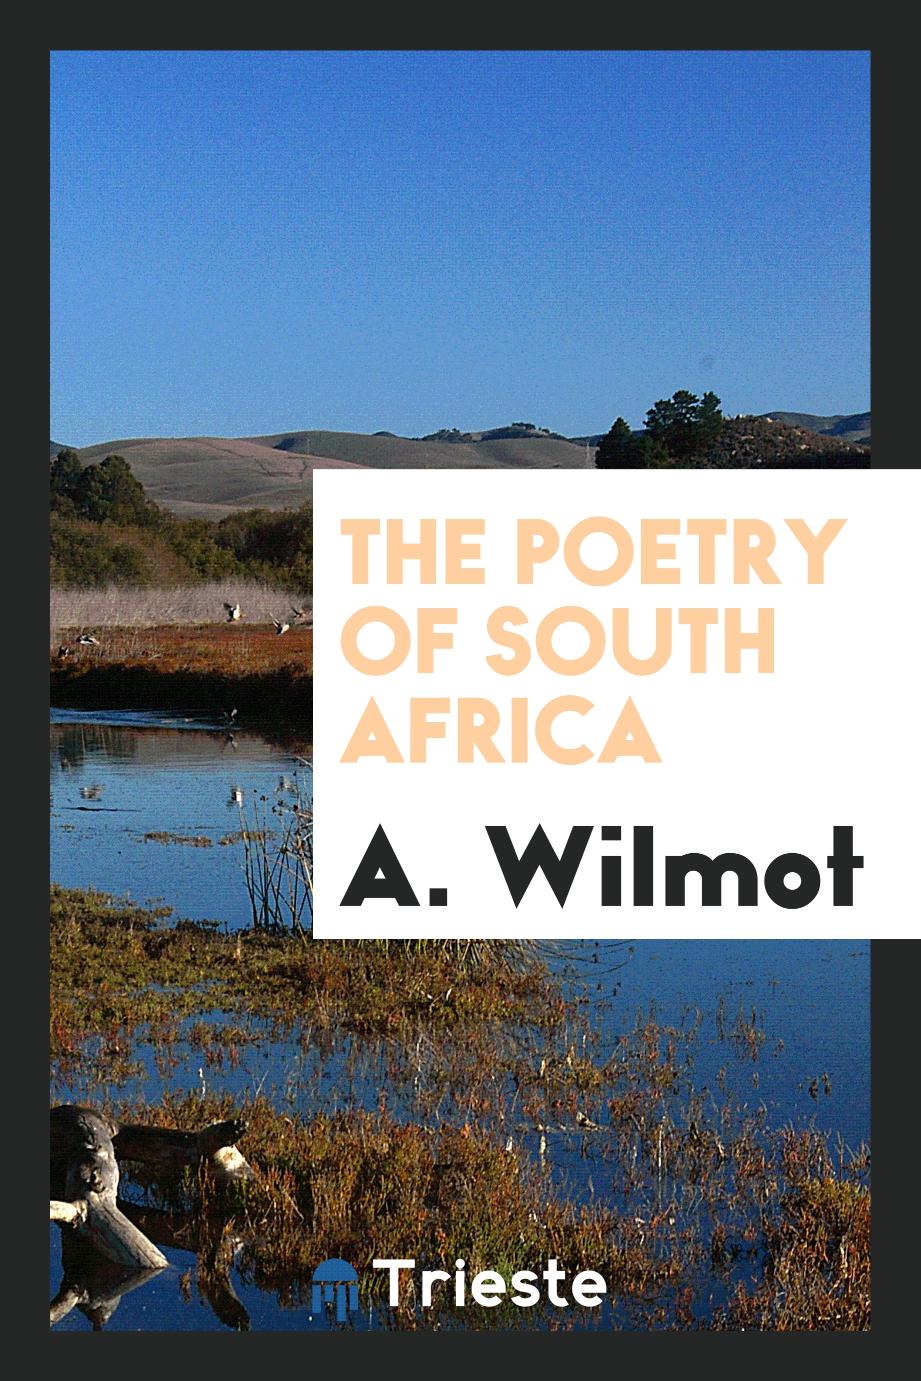 The poetry of South Africa